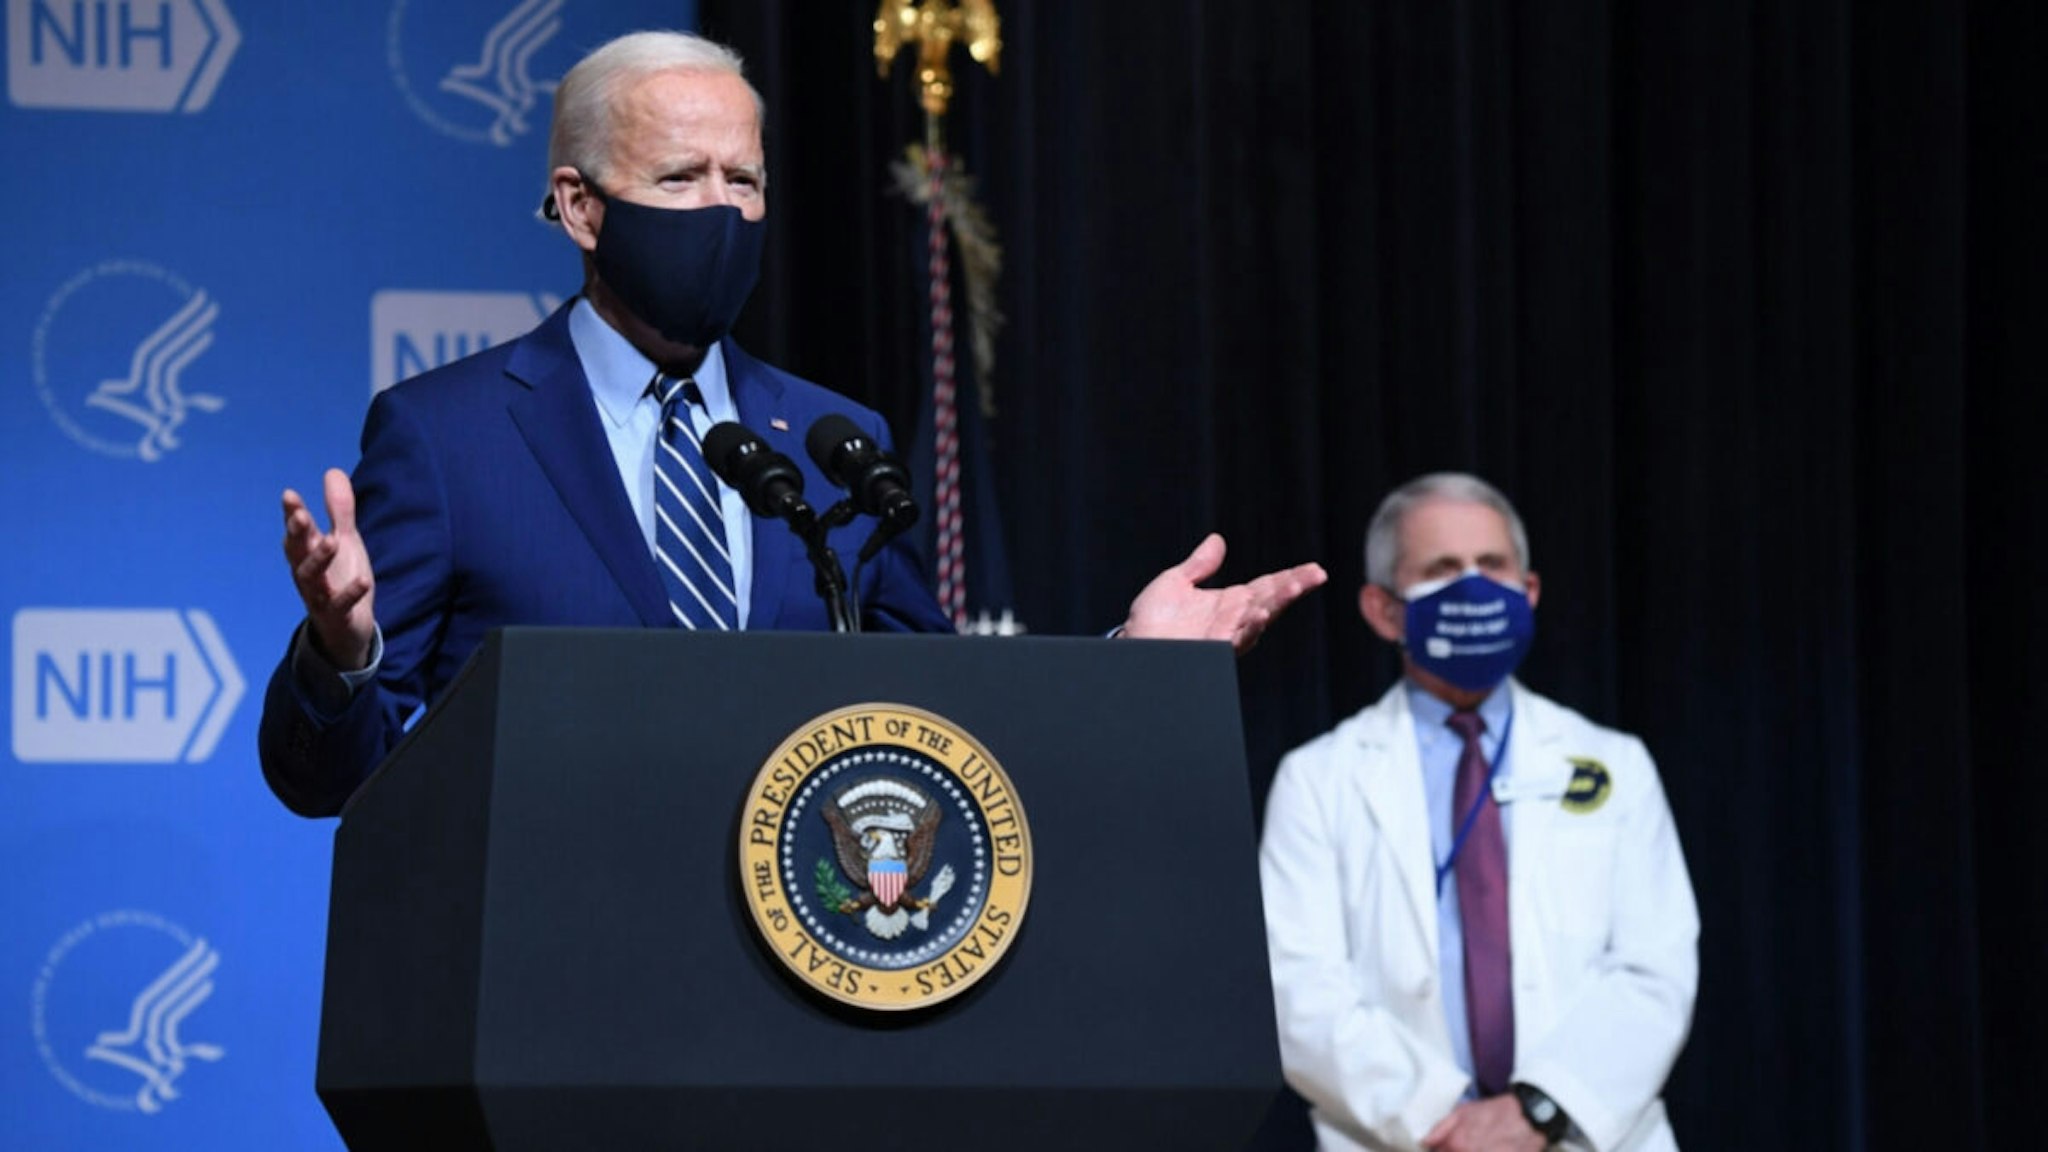 US President Joe Biden speaks, flanked by White House Chief Medical Adviser on Covid-19 Dr. Anthony Fauci (R) during a visit to the National Institutes of Health (NIH) in Bethesda, Maryland, February 11, 2021.